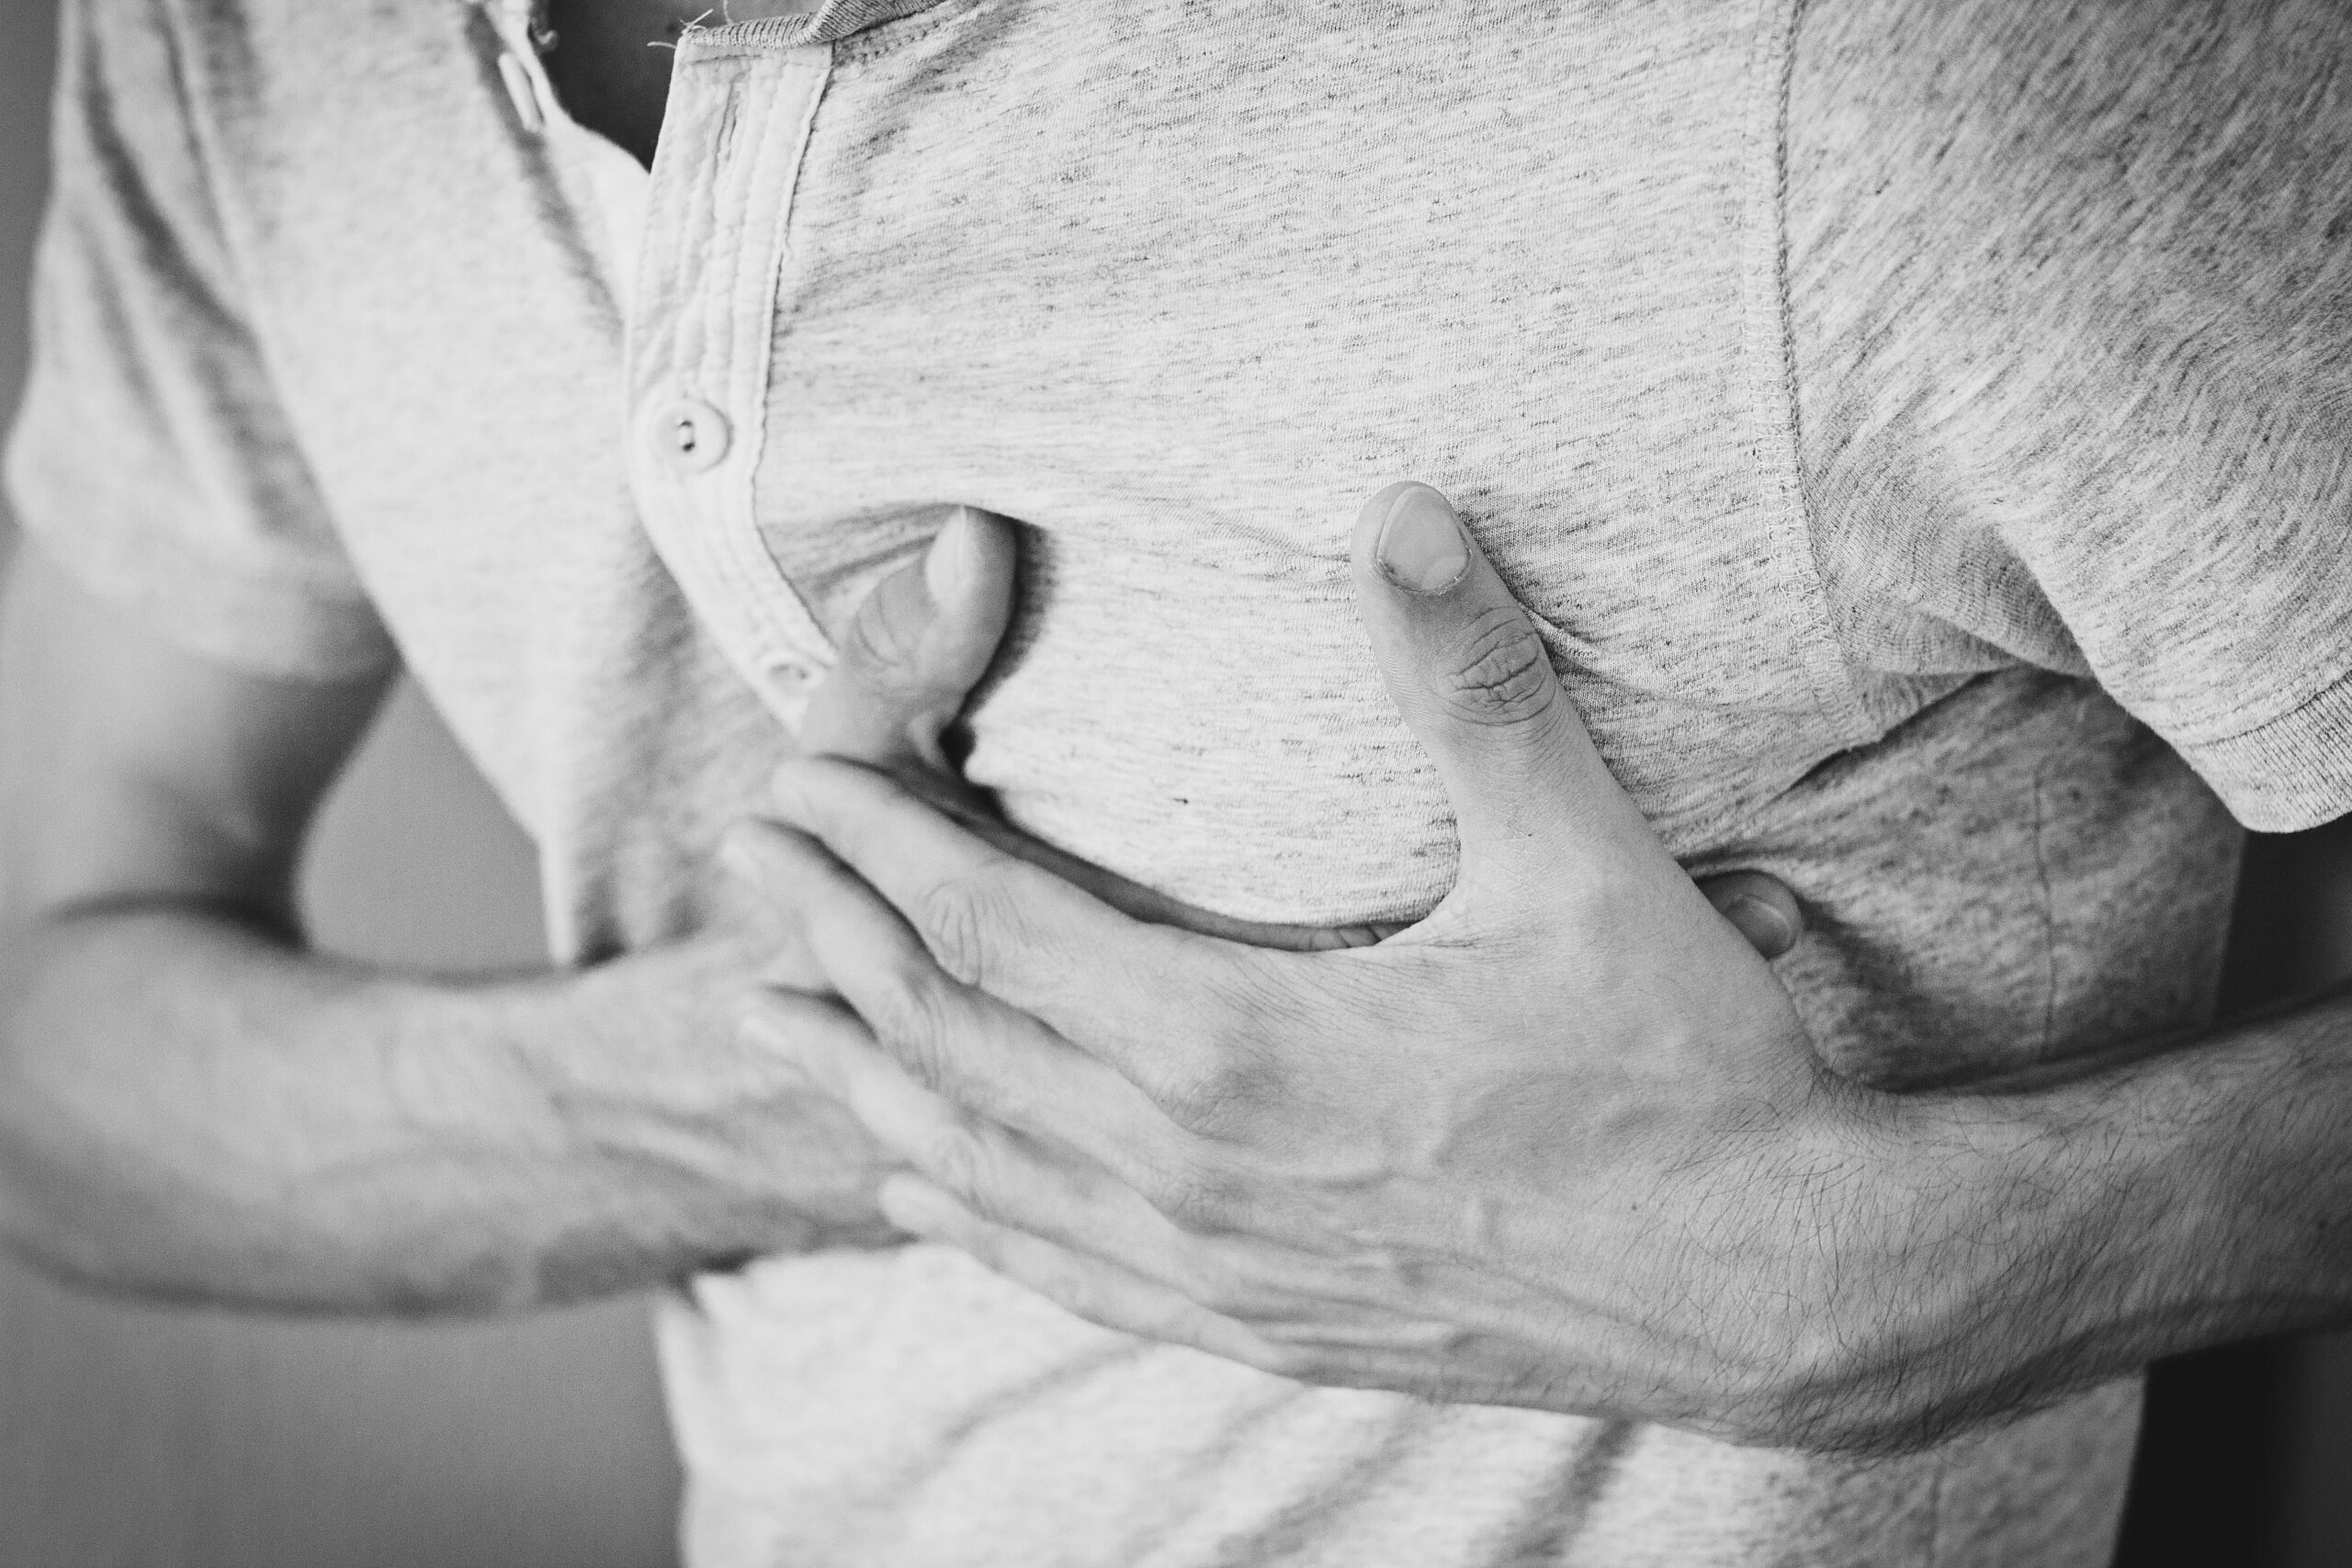 Chest Pain Spiritual Meaning